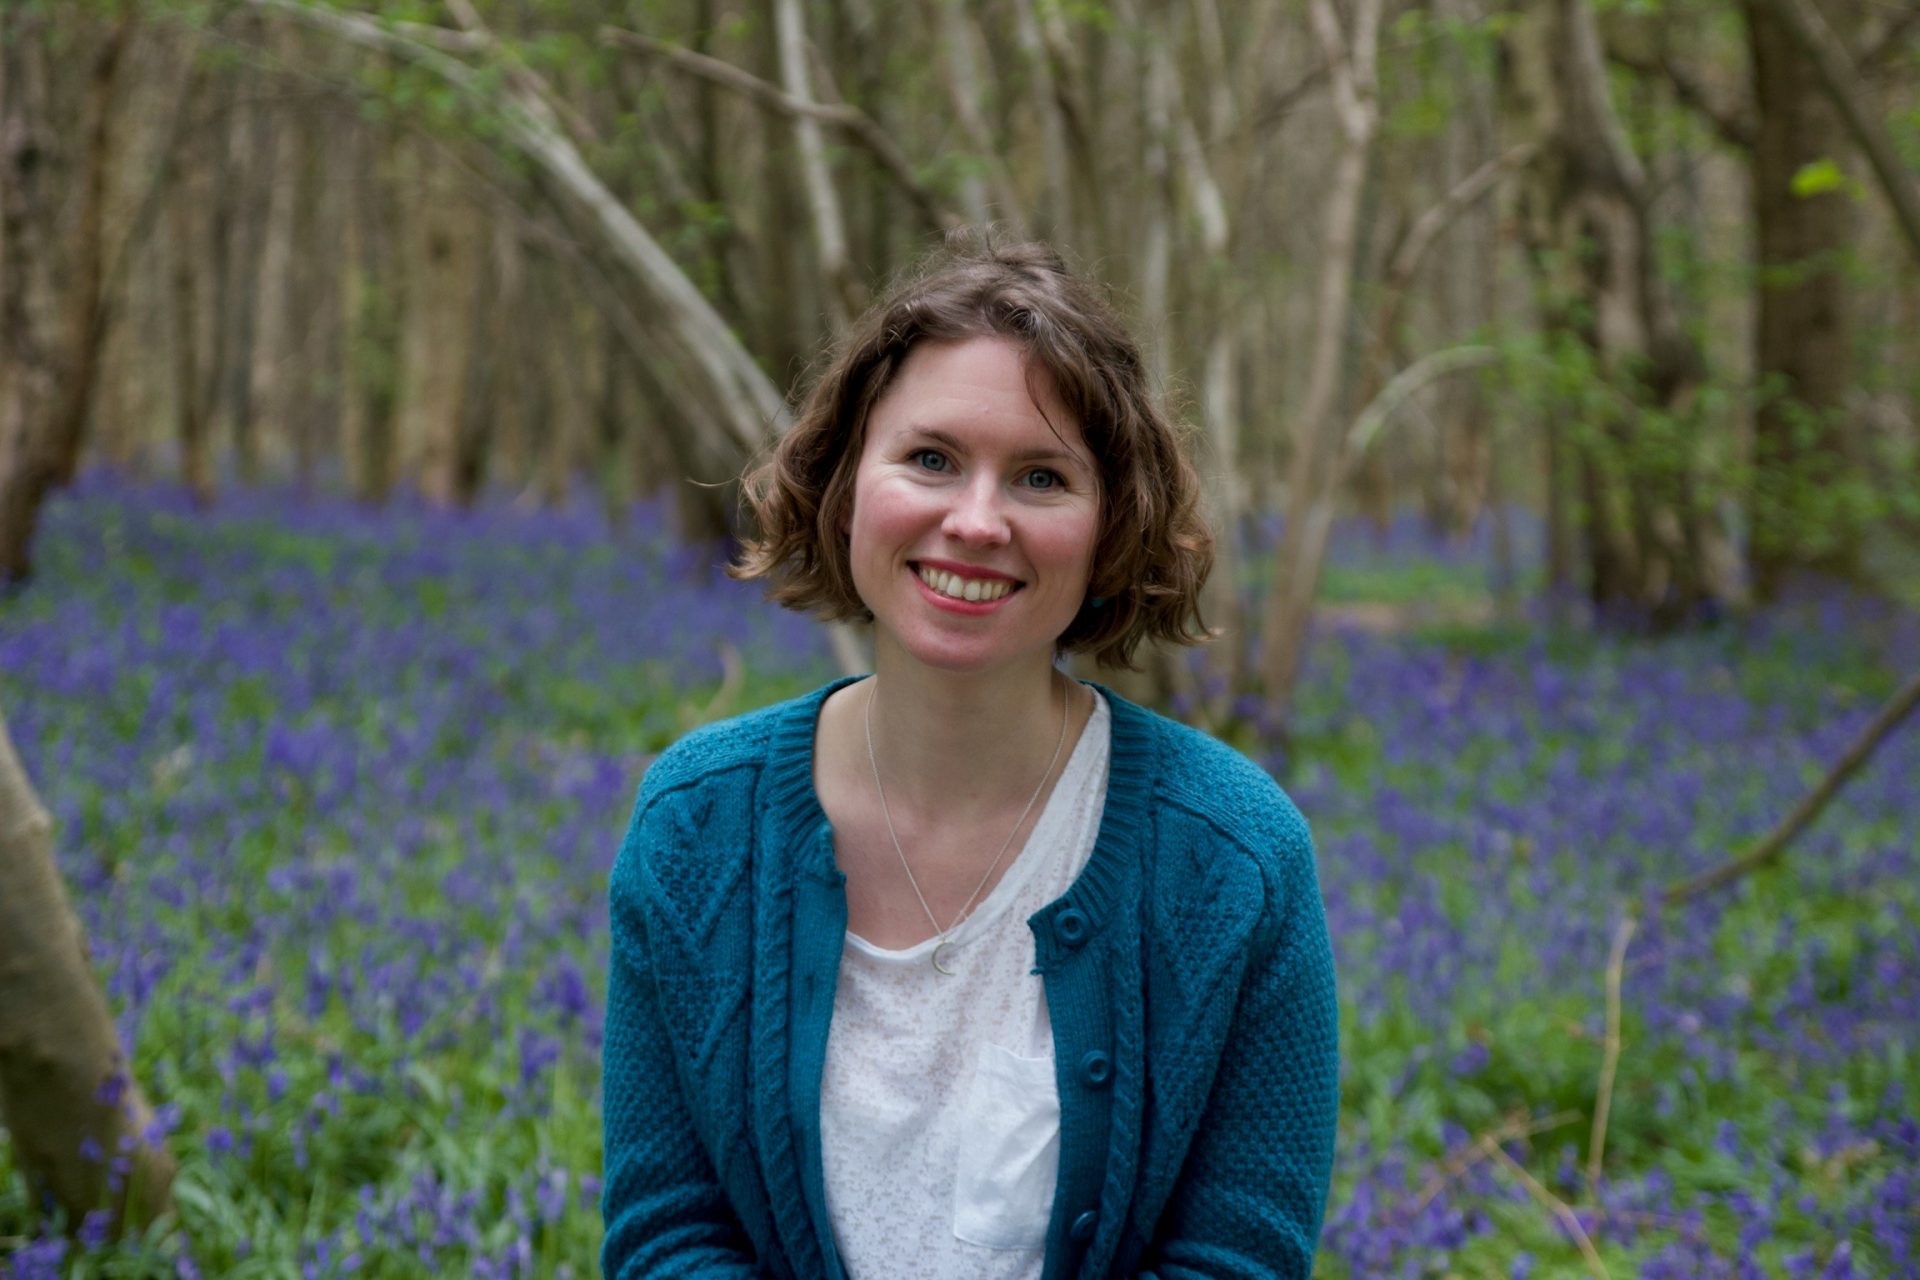 A woman with bobbed brown hair smiles at the camera. She is wearing a teal cardigan and white t-shirt and is surrounded by bluebells in a wood.